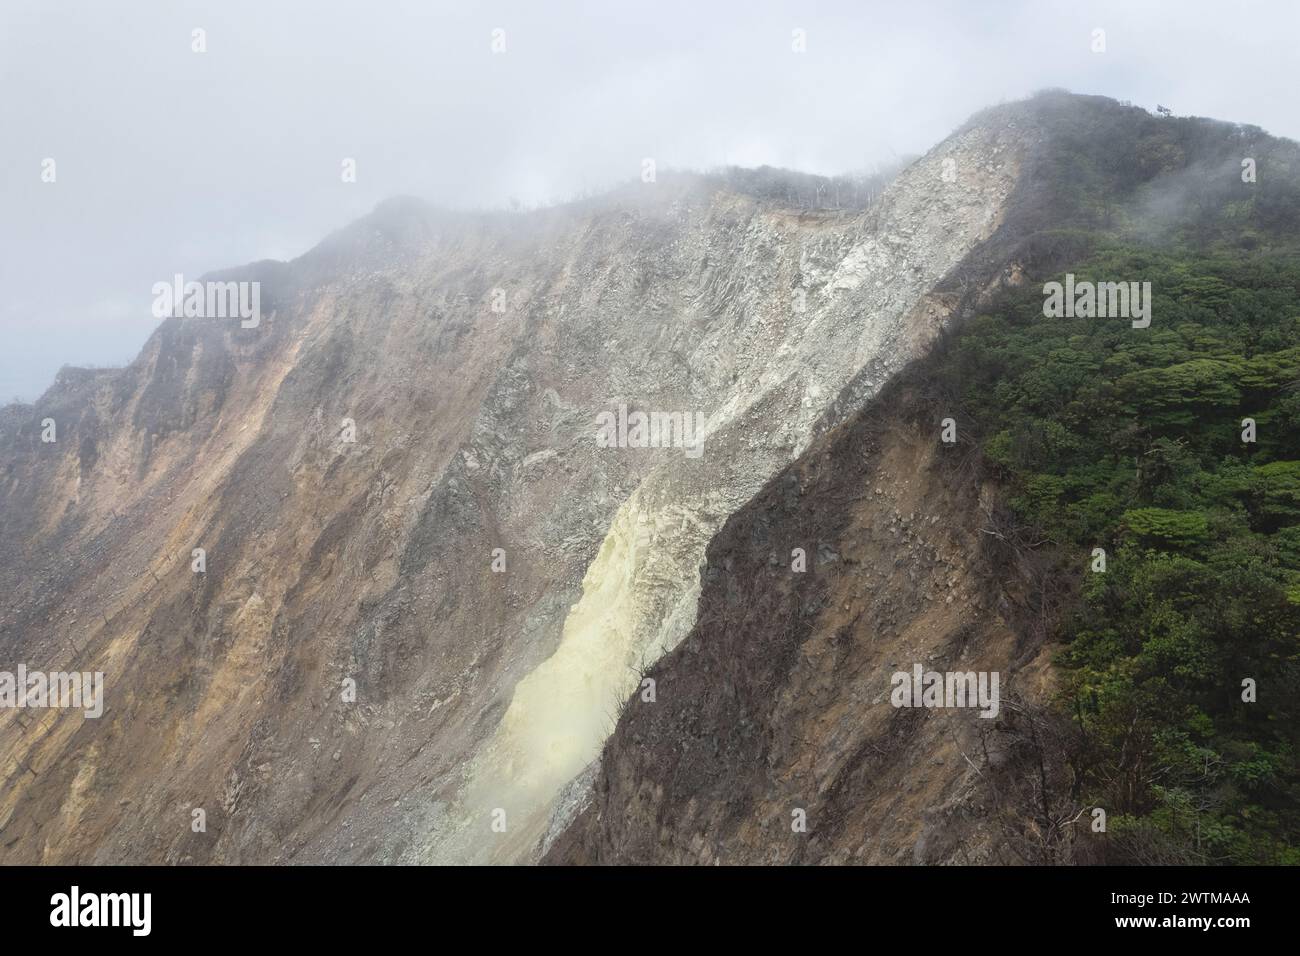 Volcano crater with yellow sulfur slope in smoke cloud sky Stock Photo